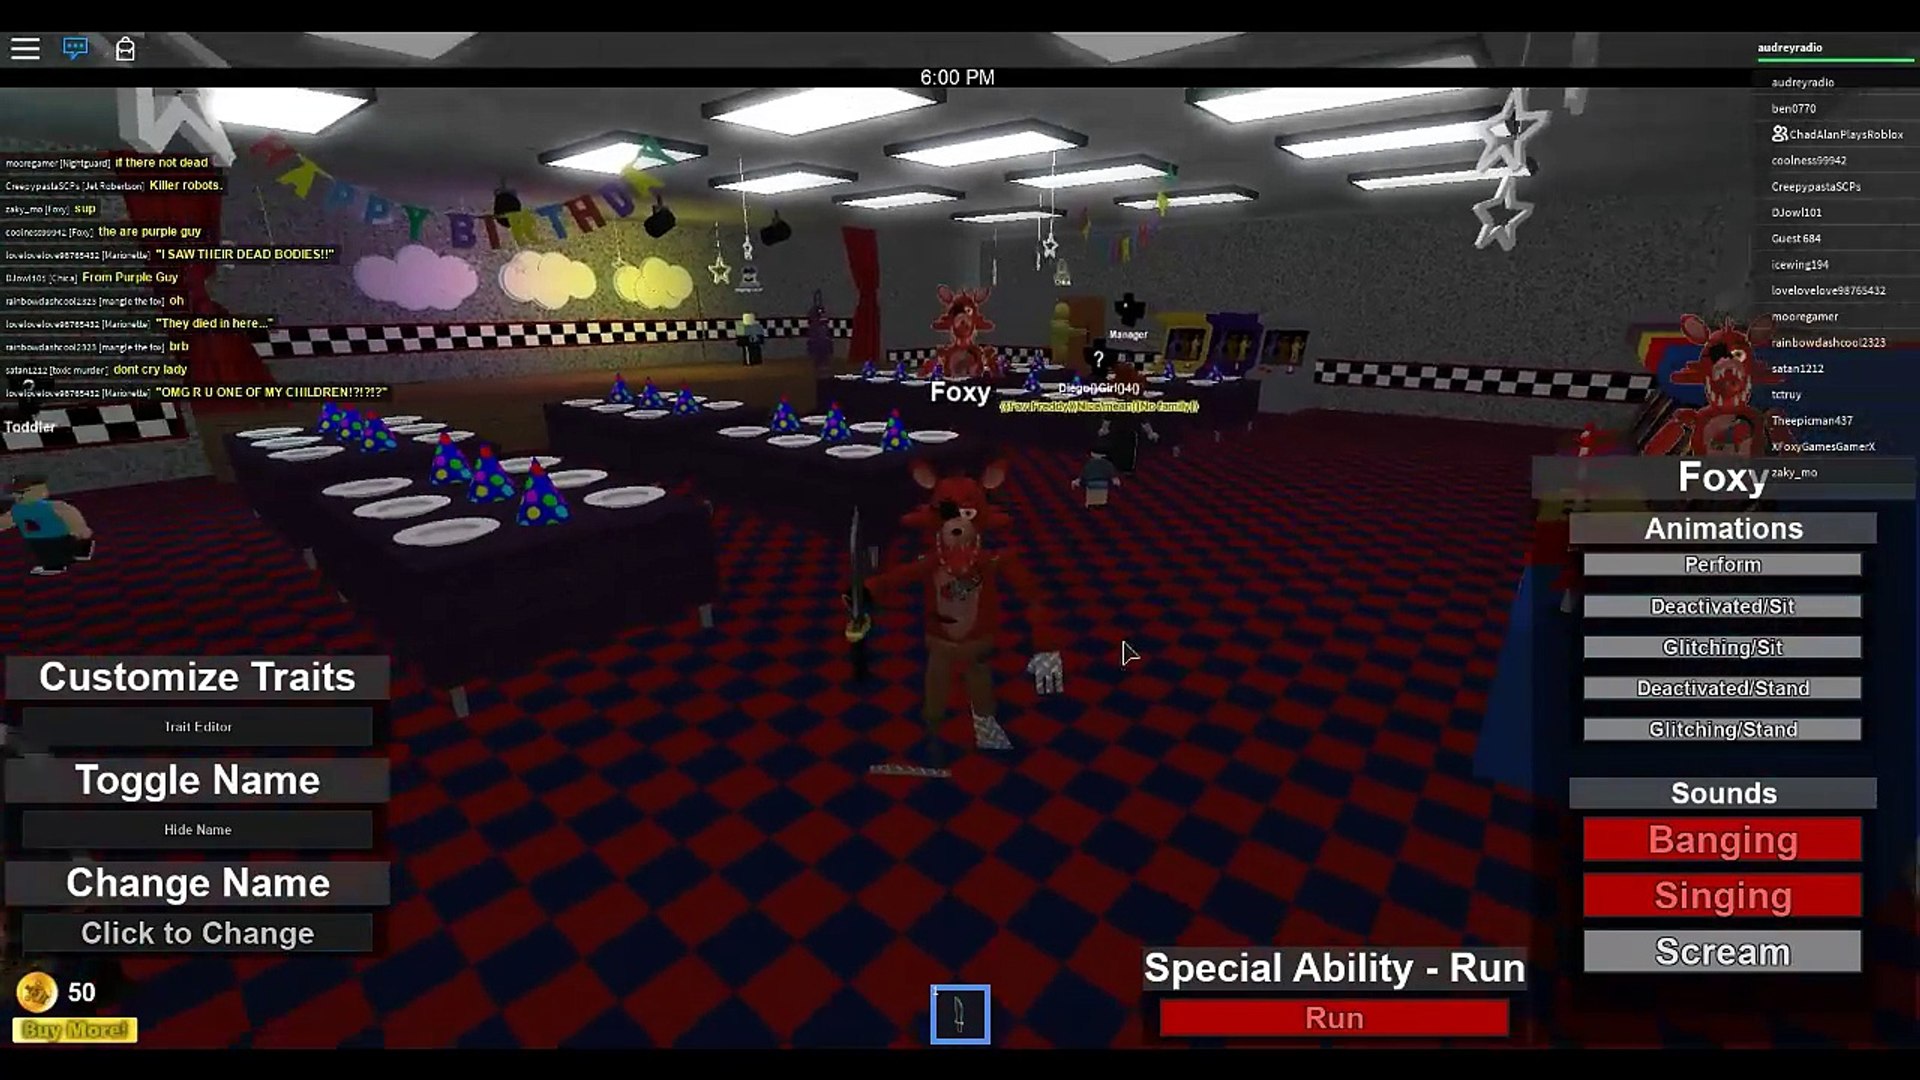 Roblox Five Nights At Freddys Fnaf Roleplay Gamer Chad Radiojh Games Video Dailymotion - roblox five nights at freddys fnaf roleplay gamer chad radiojh games